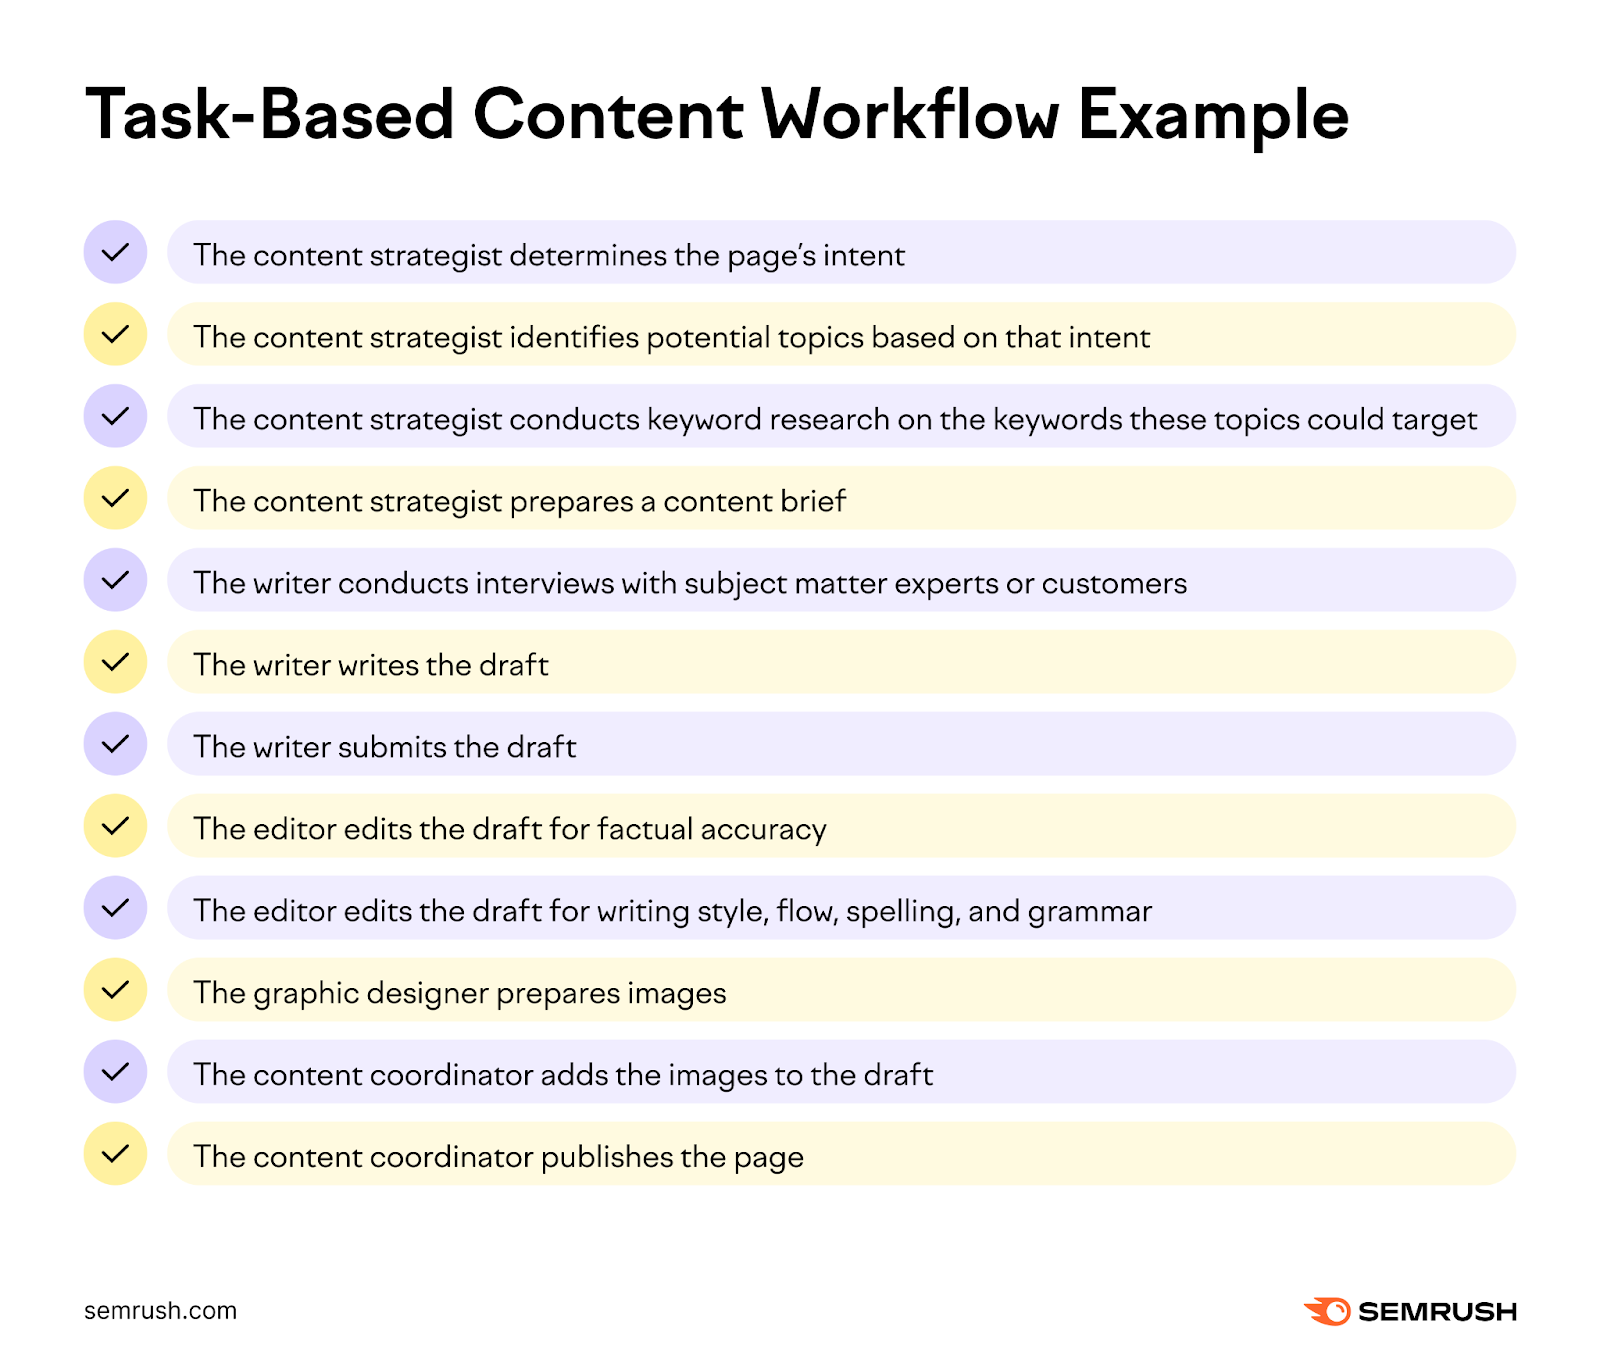 A task-based content workflow template